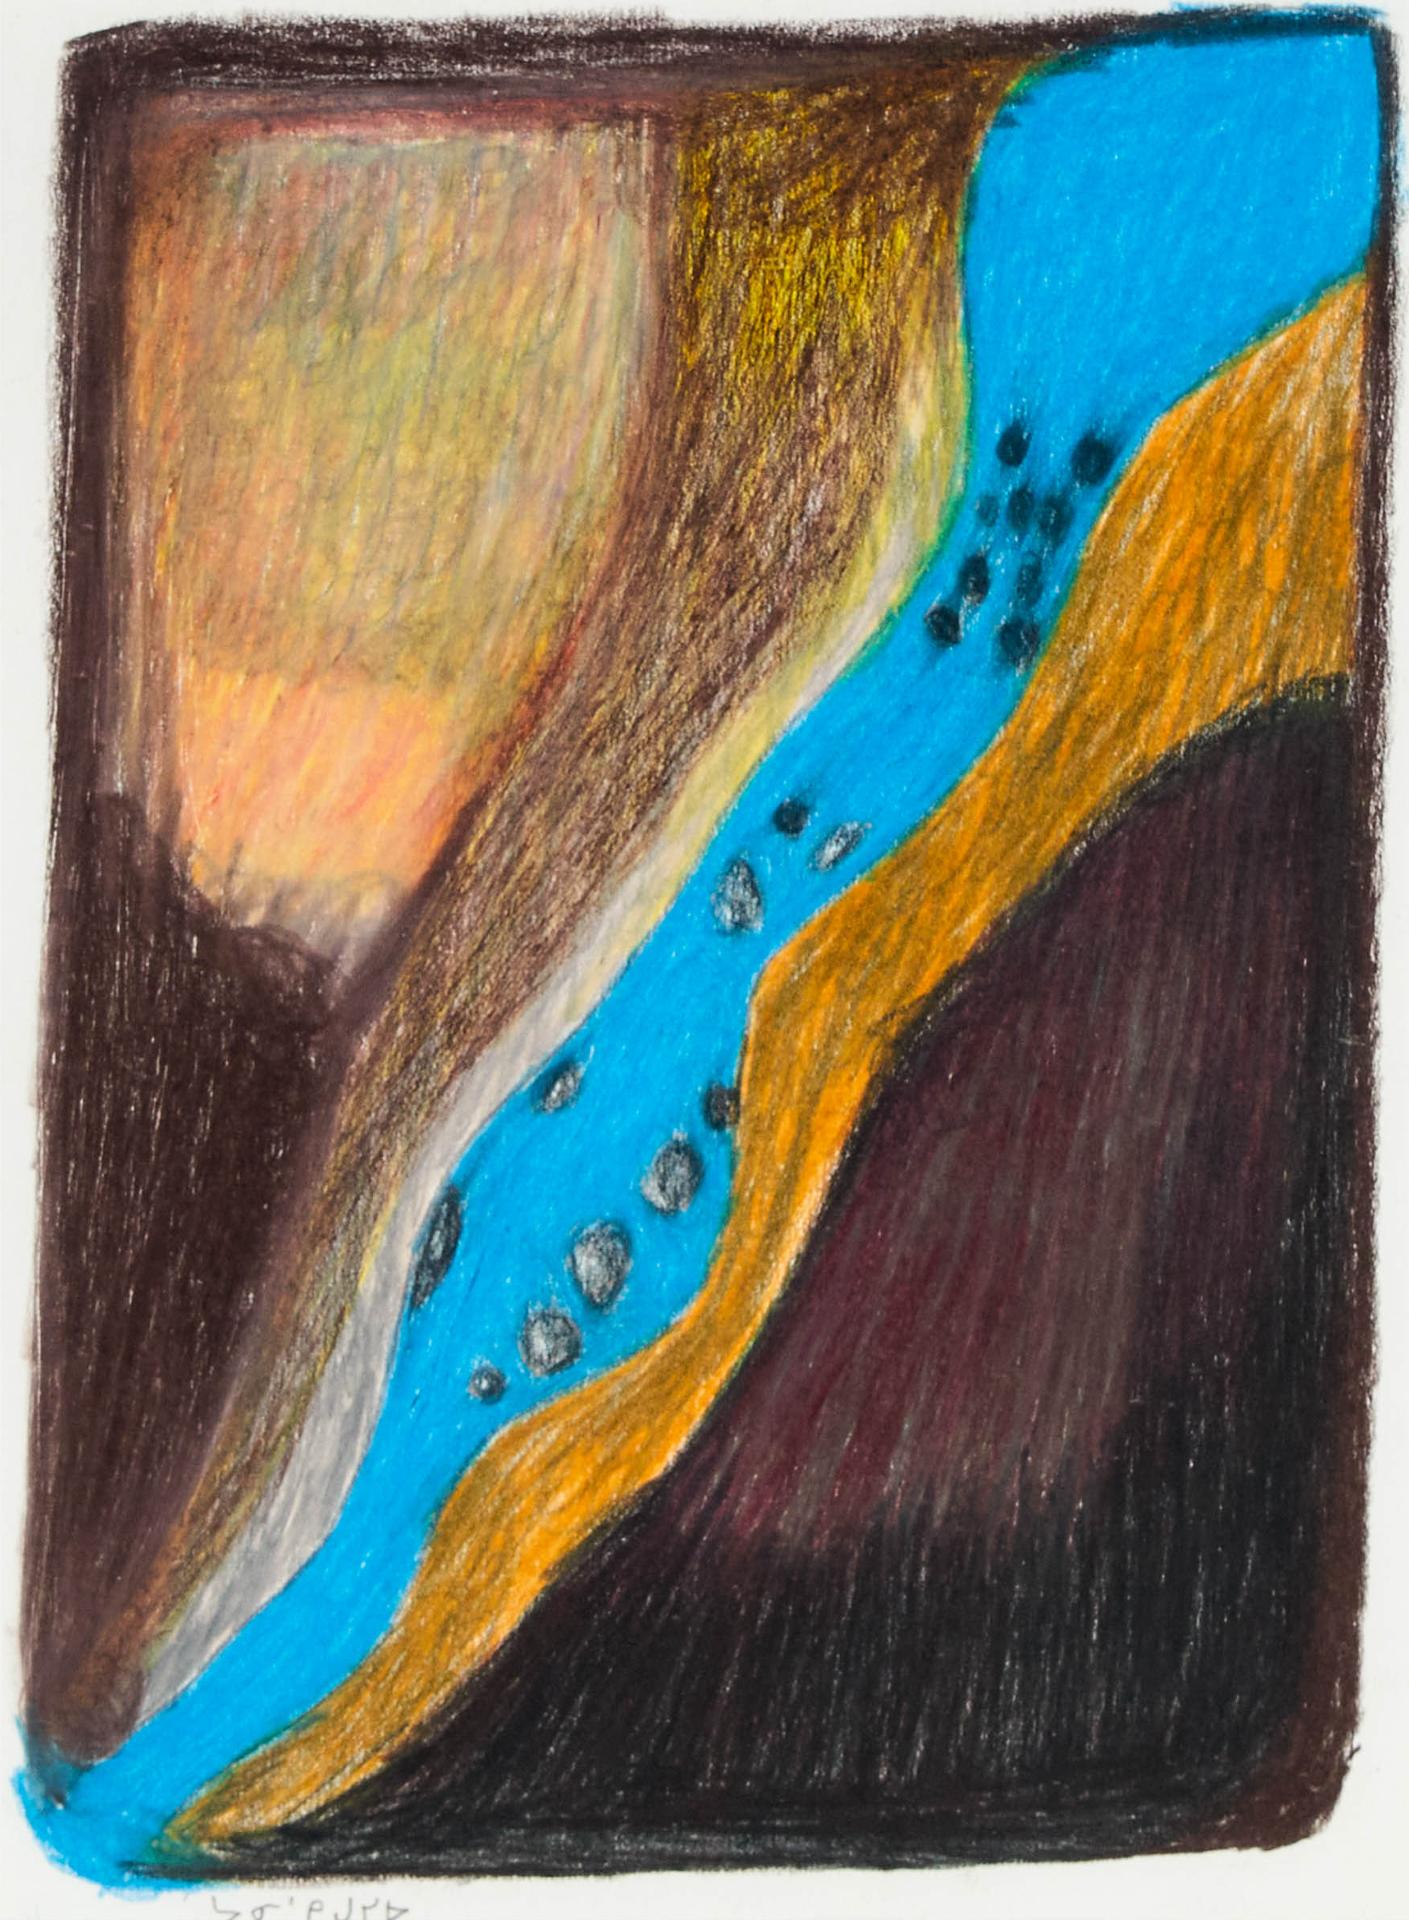 Janet Kigusiuq (1926-2005) - Untitled (River From Above)